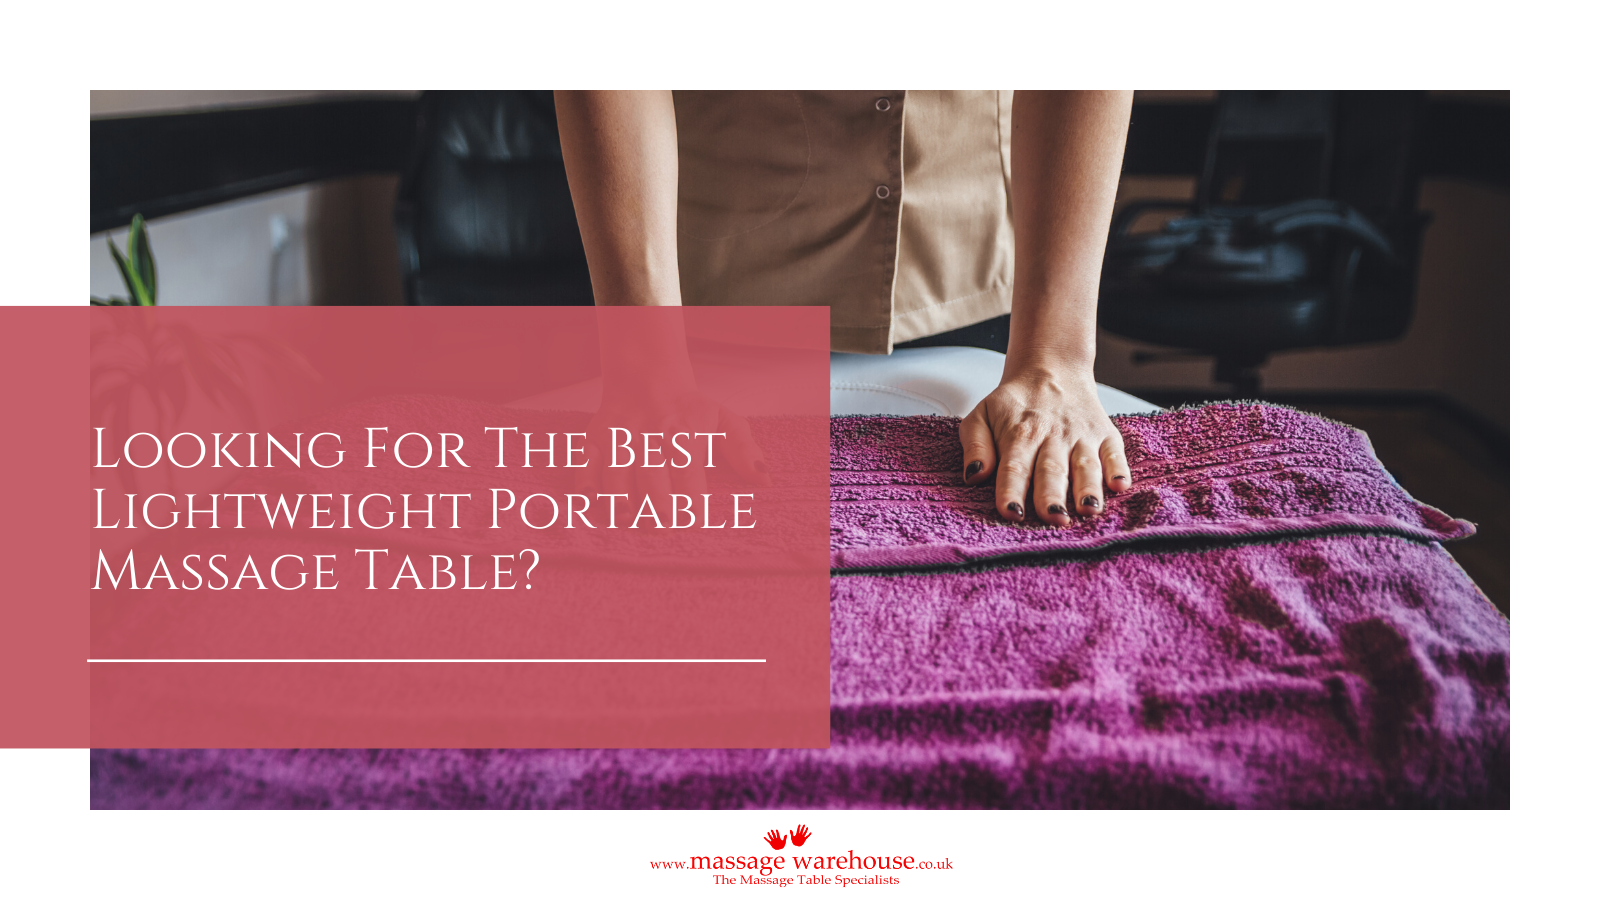 As a Massage Therapist How Do you Find The Best Lightweight Portable Massage Table For Your Massage Therapy Business?